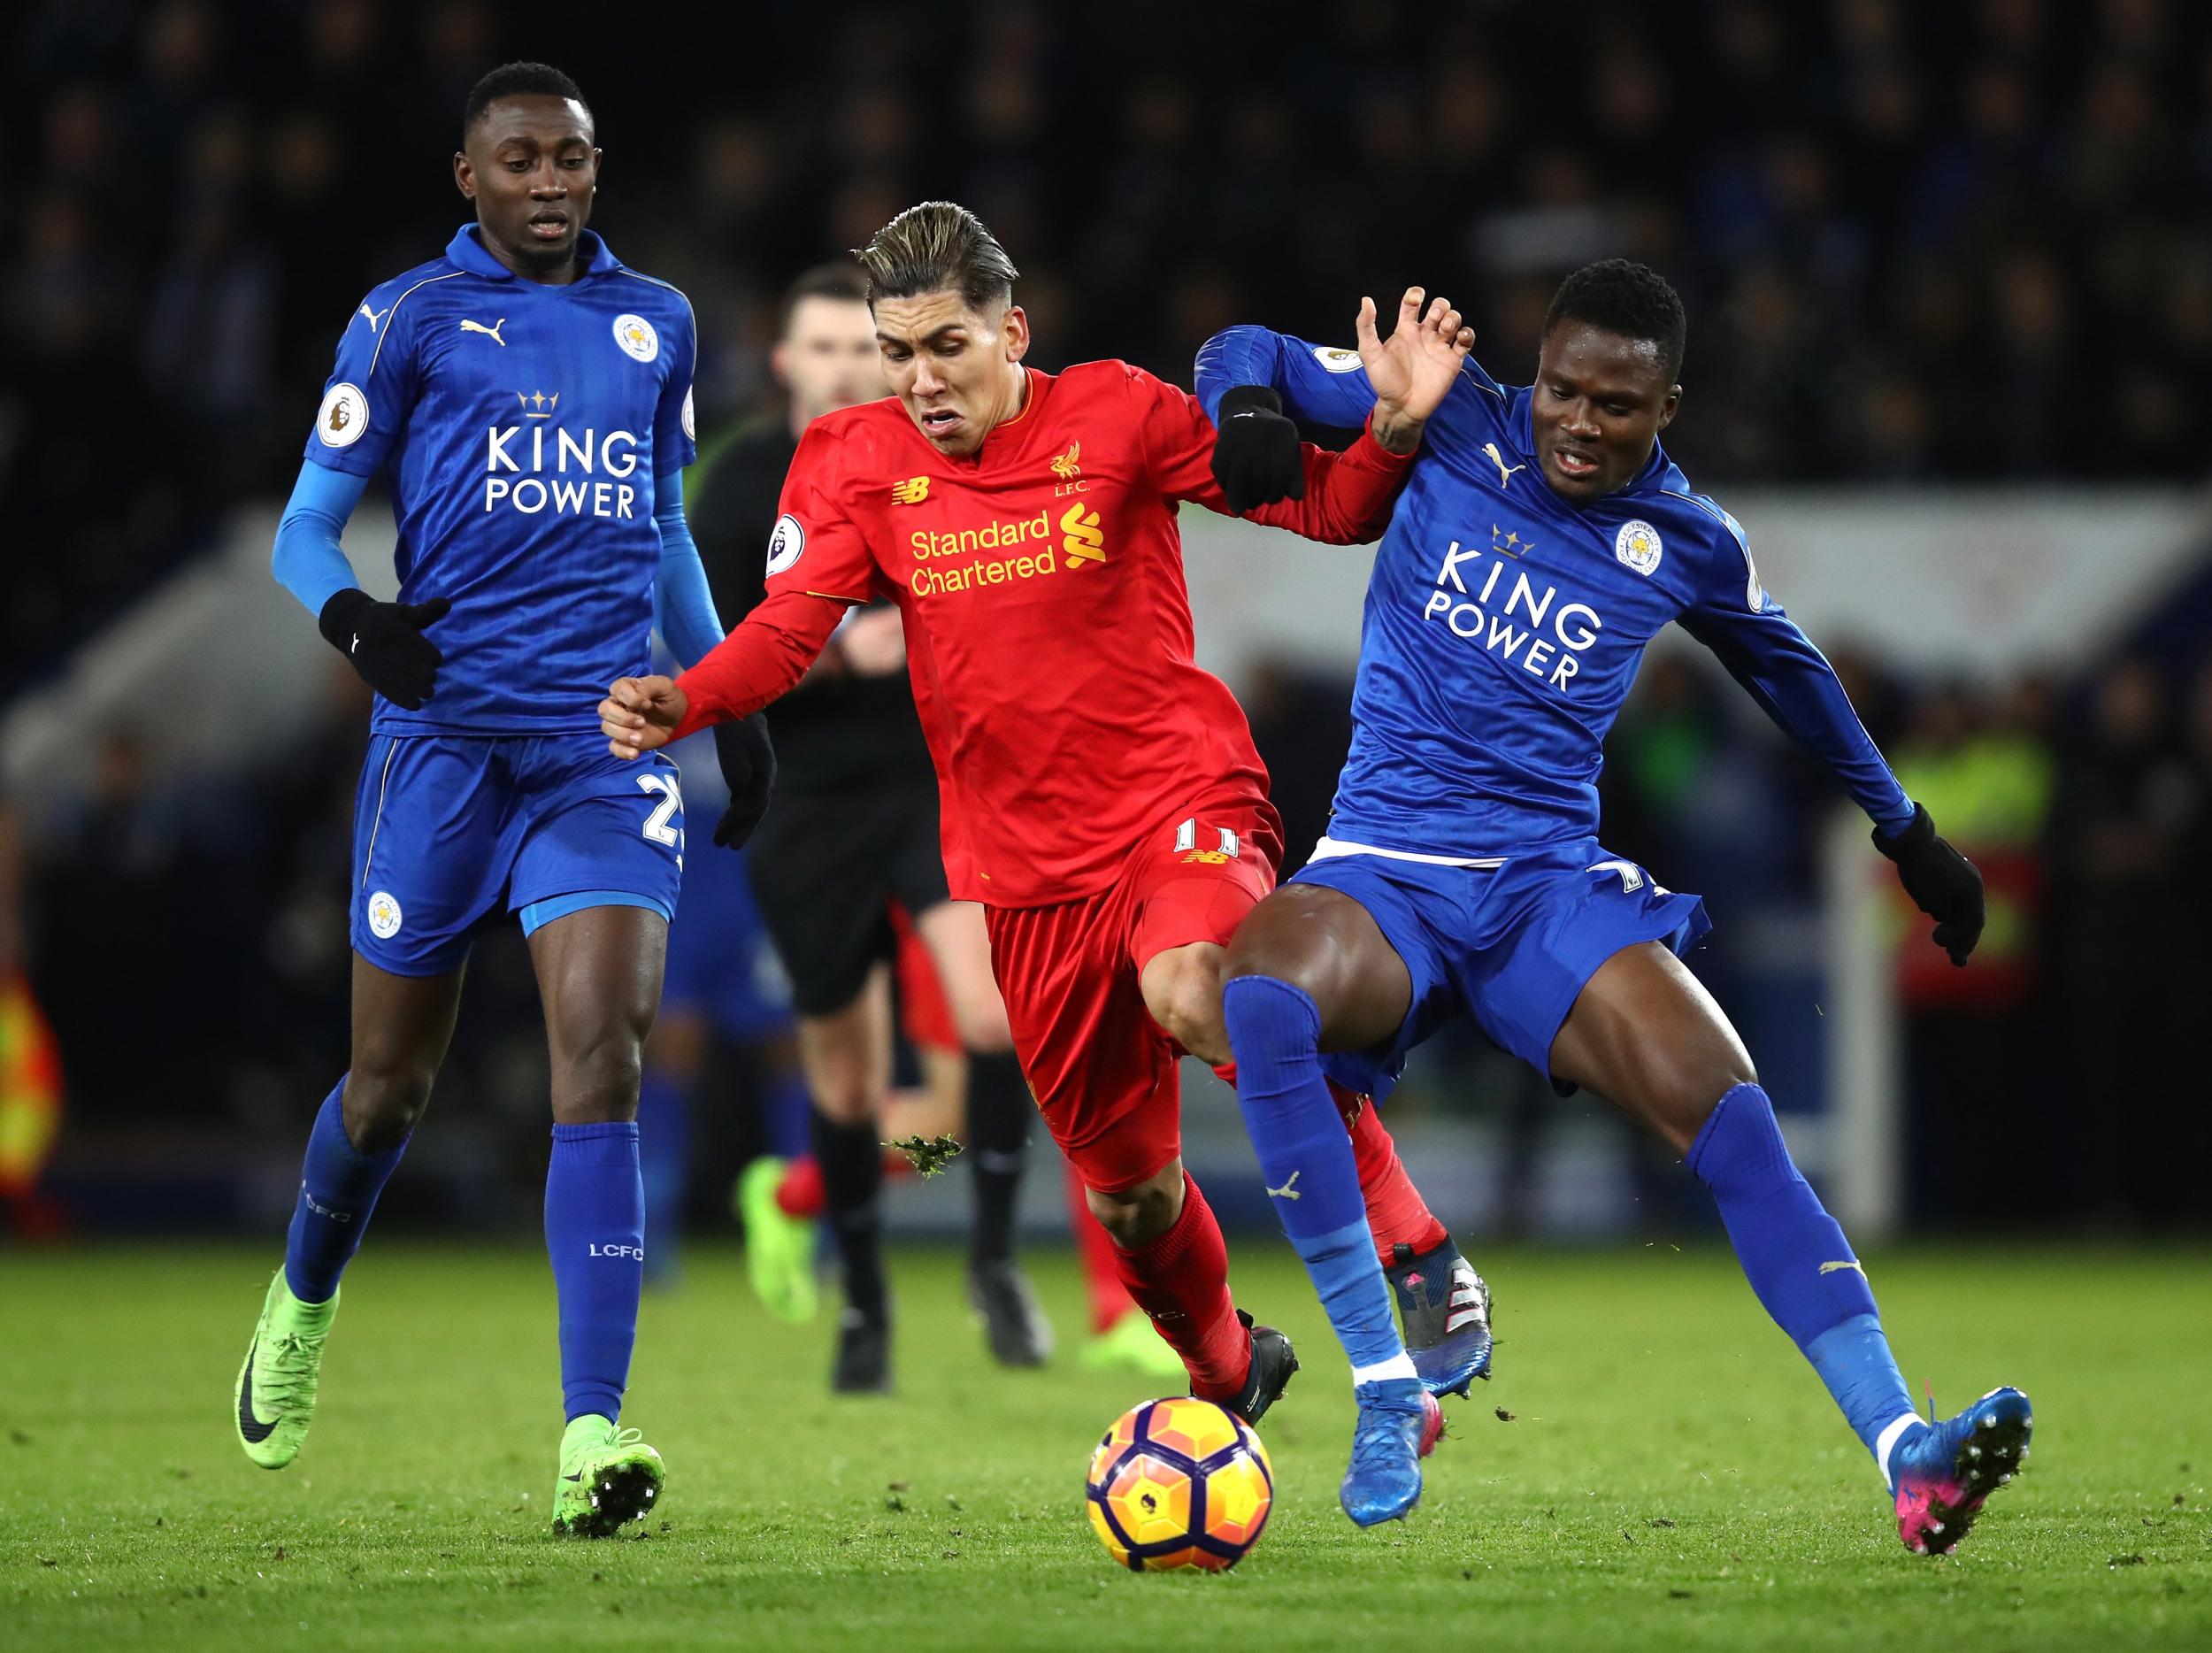 &#13;
Leicester secured their first league win of 2017 against Liverpool on Monday &#13;